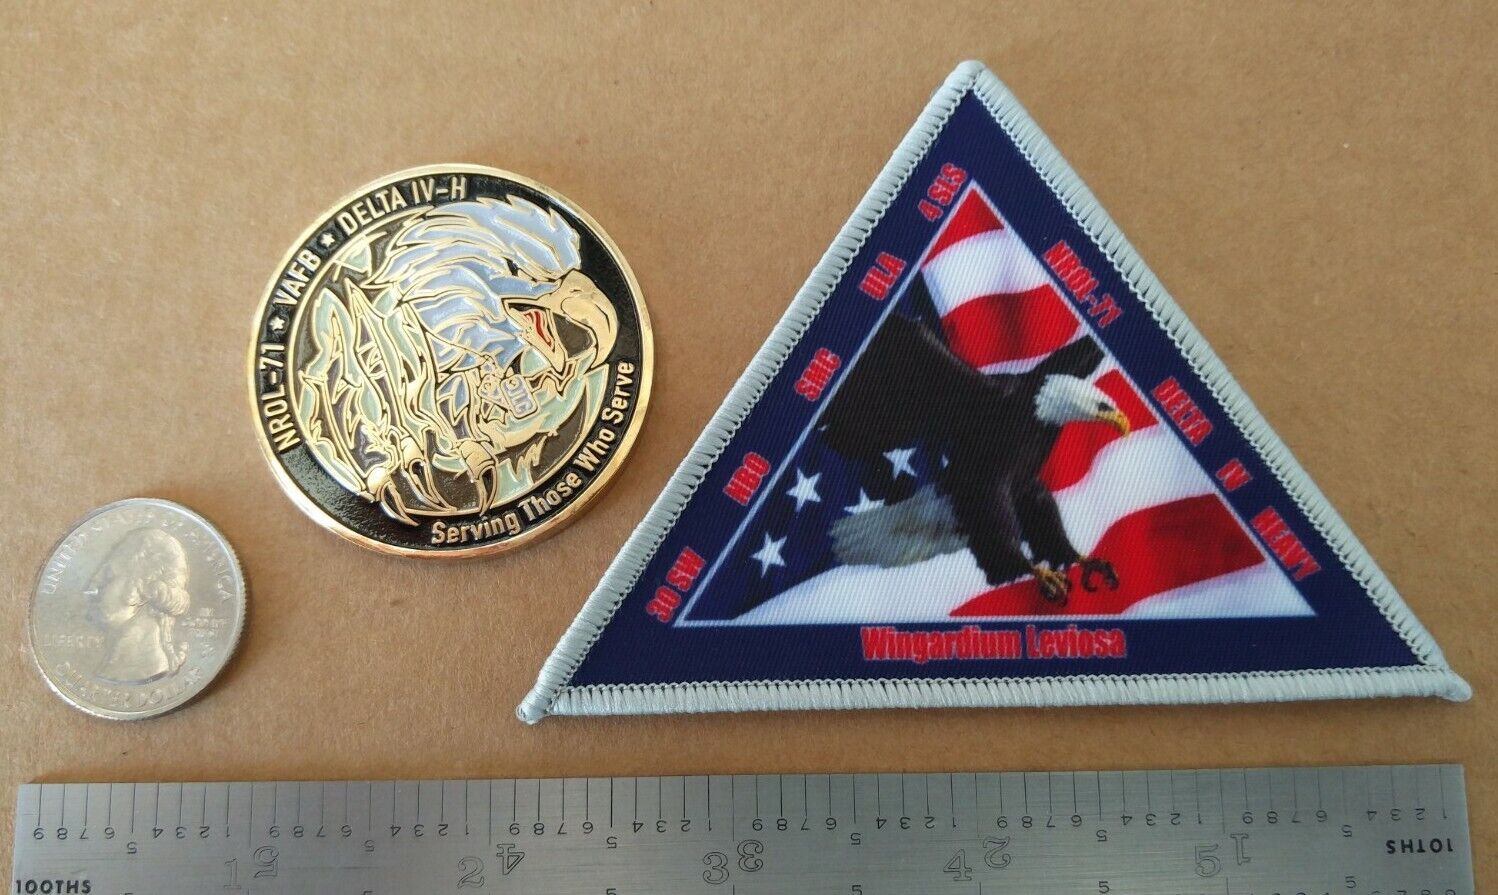 Authentic/Original USAF NRO VAFB Delta IVH NROL-71 Mission Launch Patch & Coin